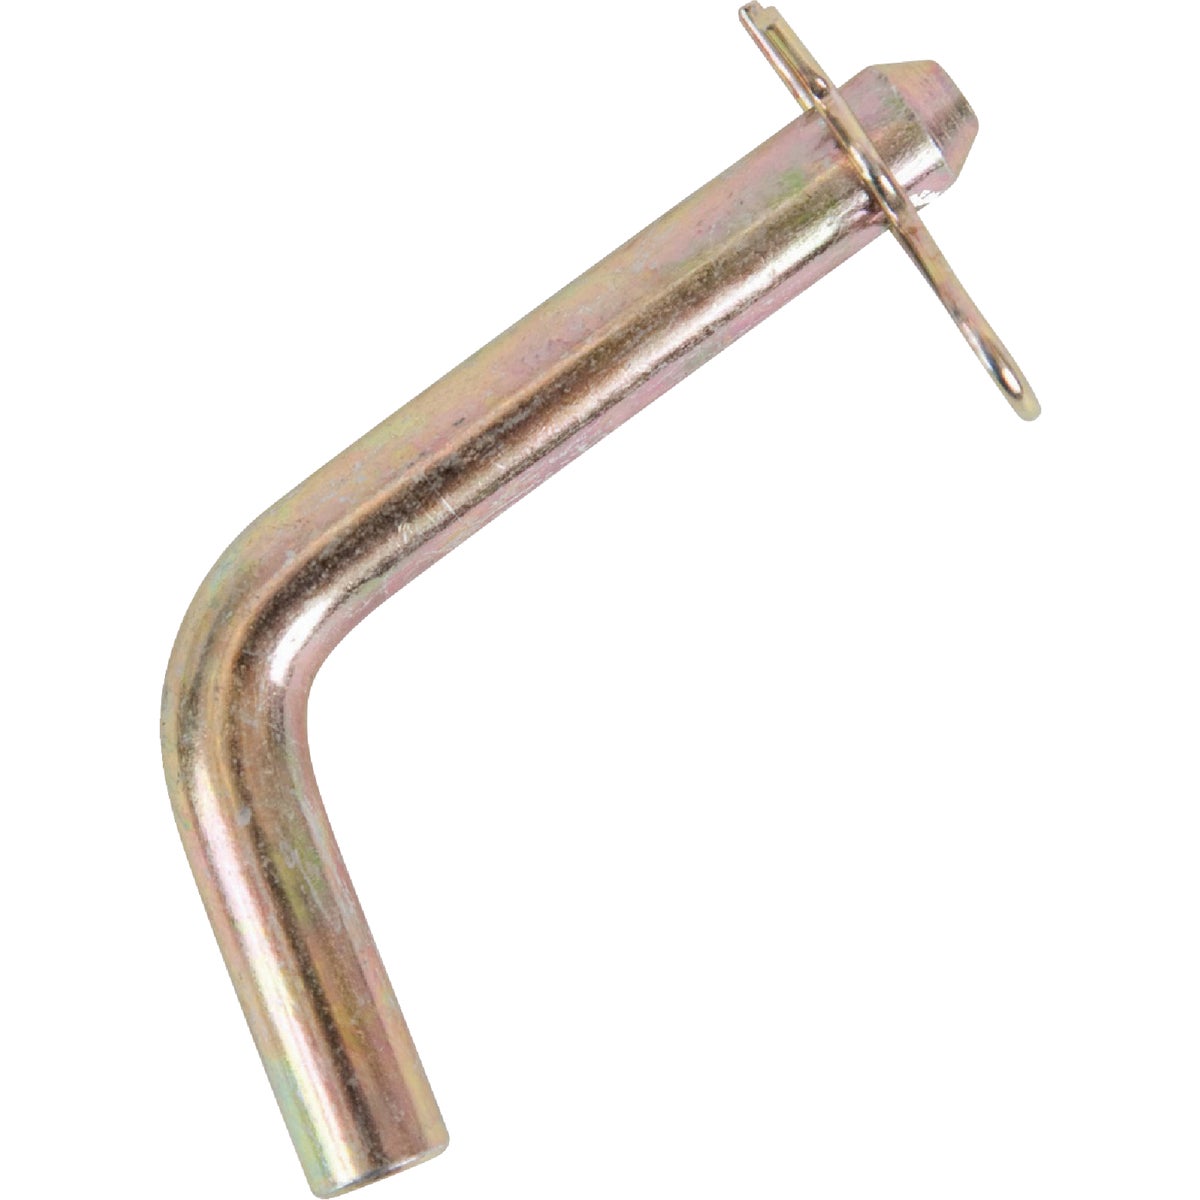 Item 759380, Yellow zinc plated hitch pin with retaining clip.